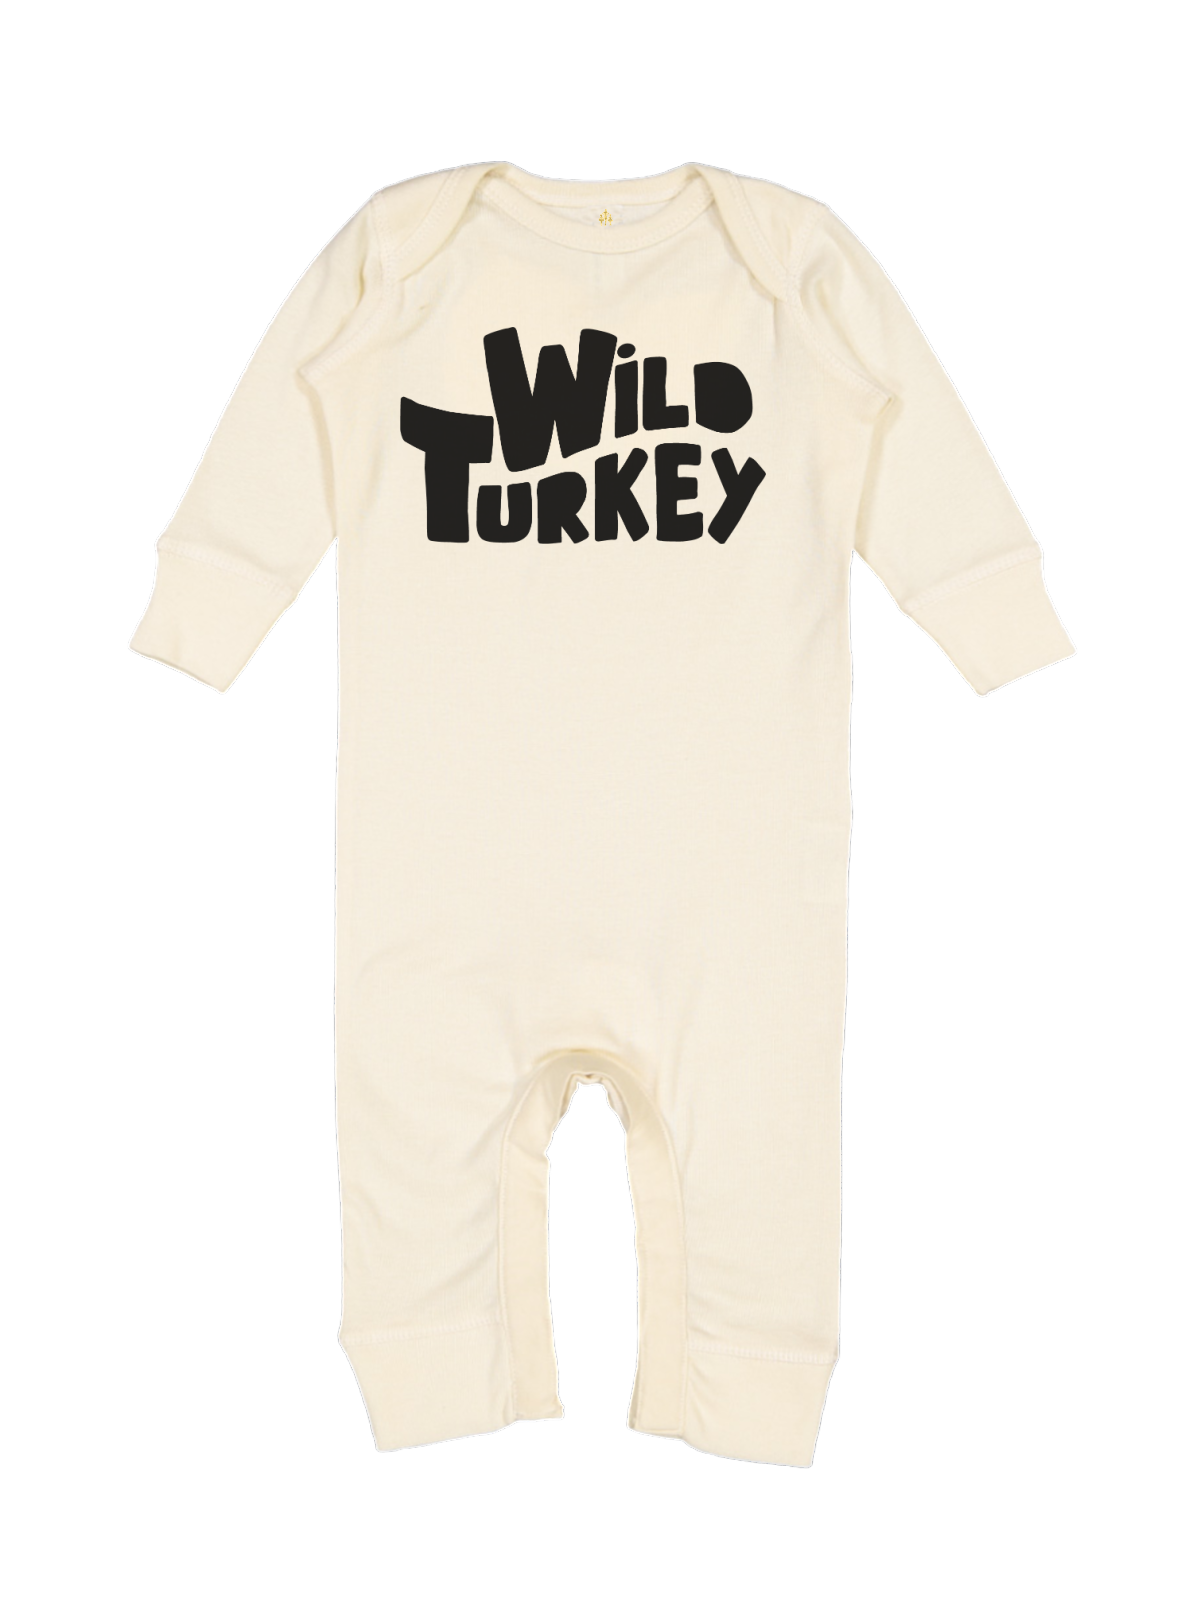 Wild Turkey Baby Thanksgiving Outfit in Natural